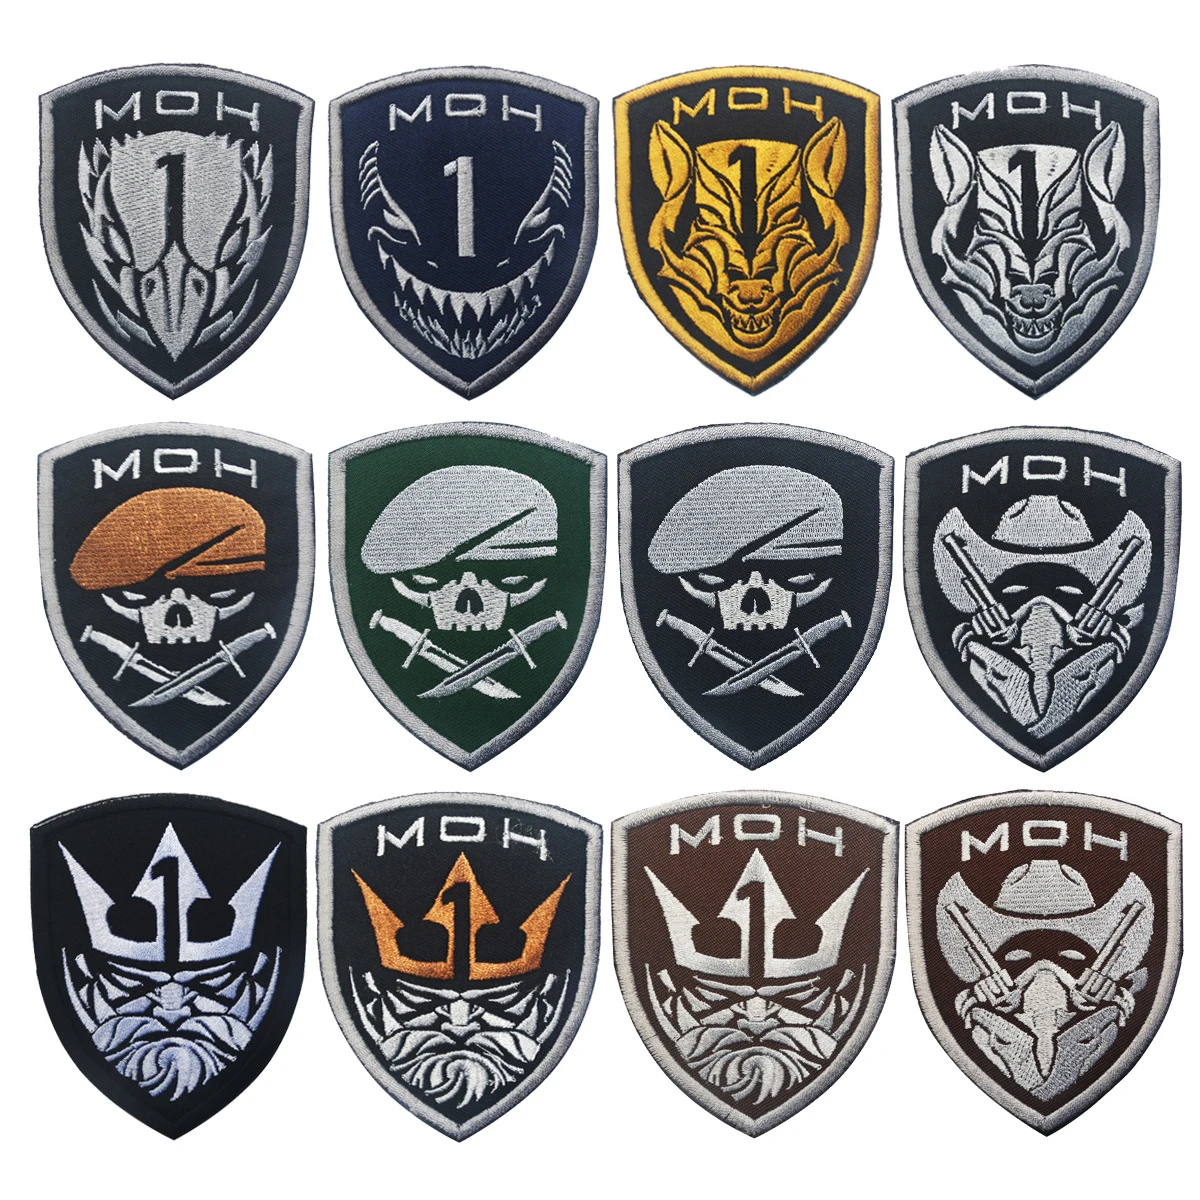 Project Honor Embroidery Patch Emblem Medal of honor King Eagle Wolf Skull Military Applique MOH  Tactical Patches